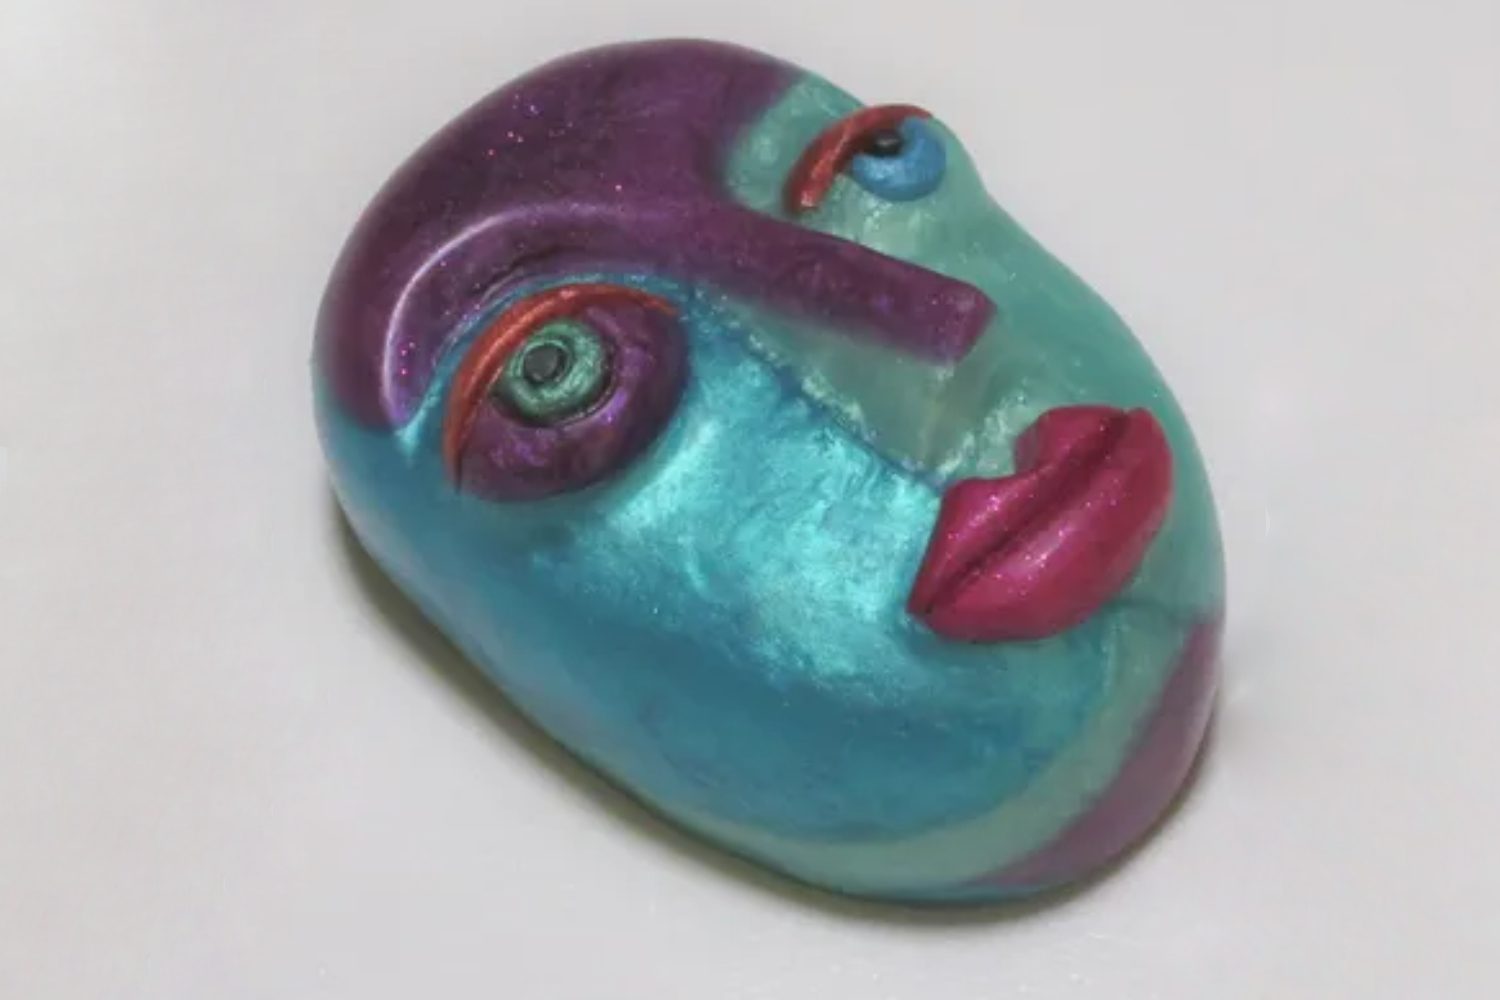 A blue face with purple lips and eyes.